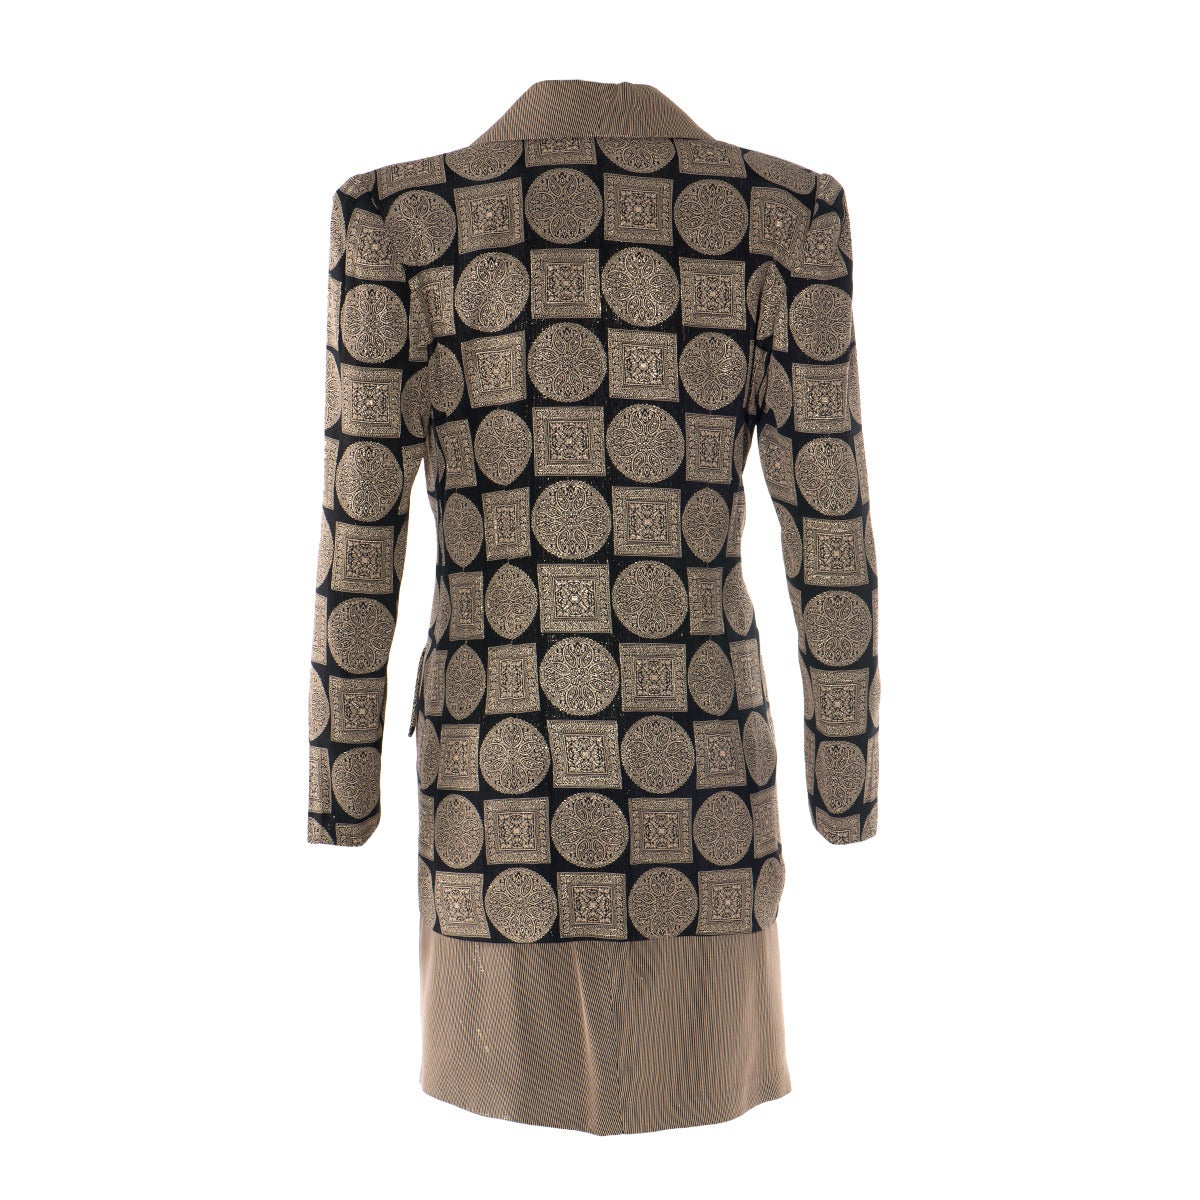 Fantastic skirt suit by Gai Mattiolo, Rome
Geometric pattern
Black with golden striped shades
One single jewel button, Gai Mattiolo style
Materials: acetate and viscose
2 Pockets
Made in Italy
Italian size 42 (6/8 US)
Worldwide express